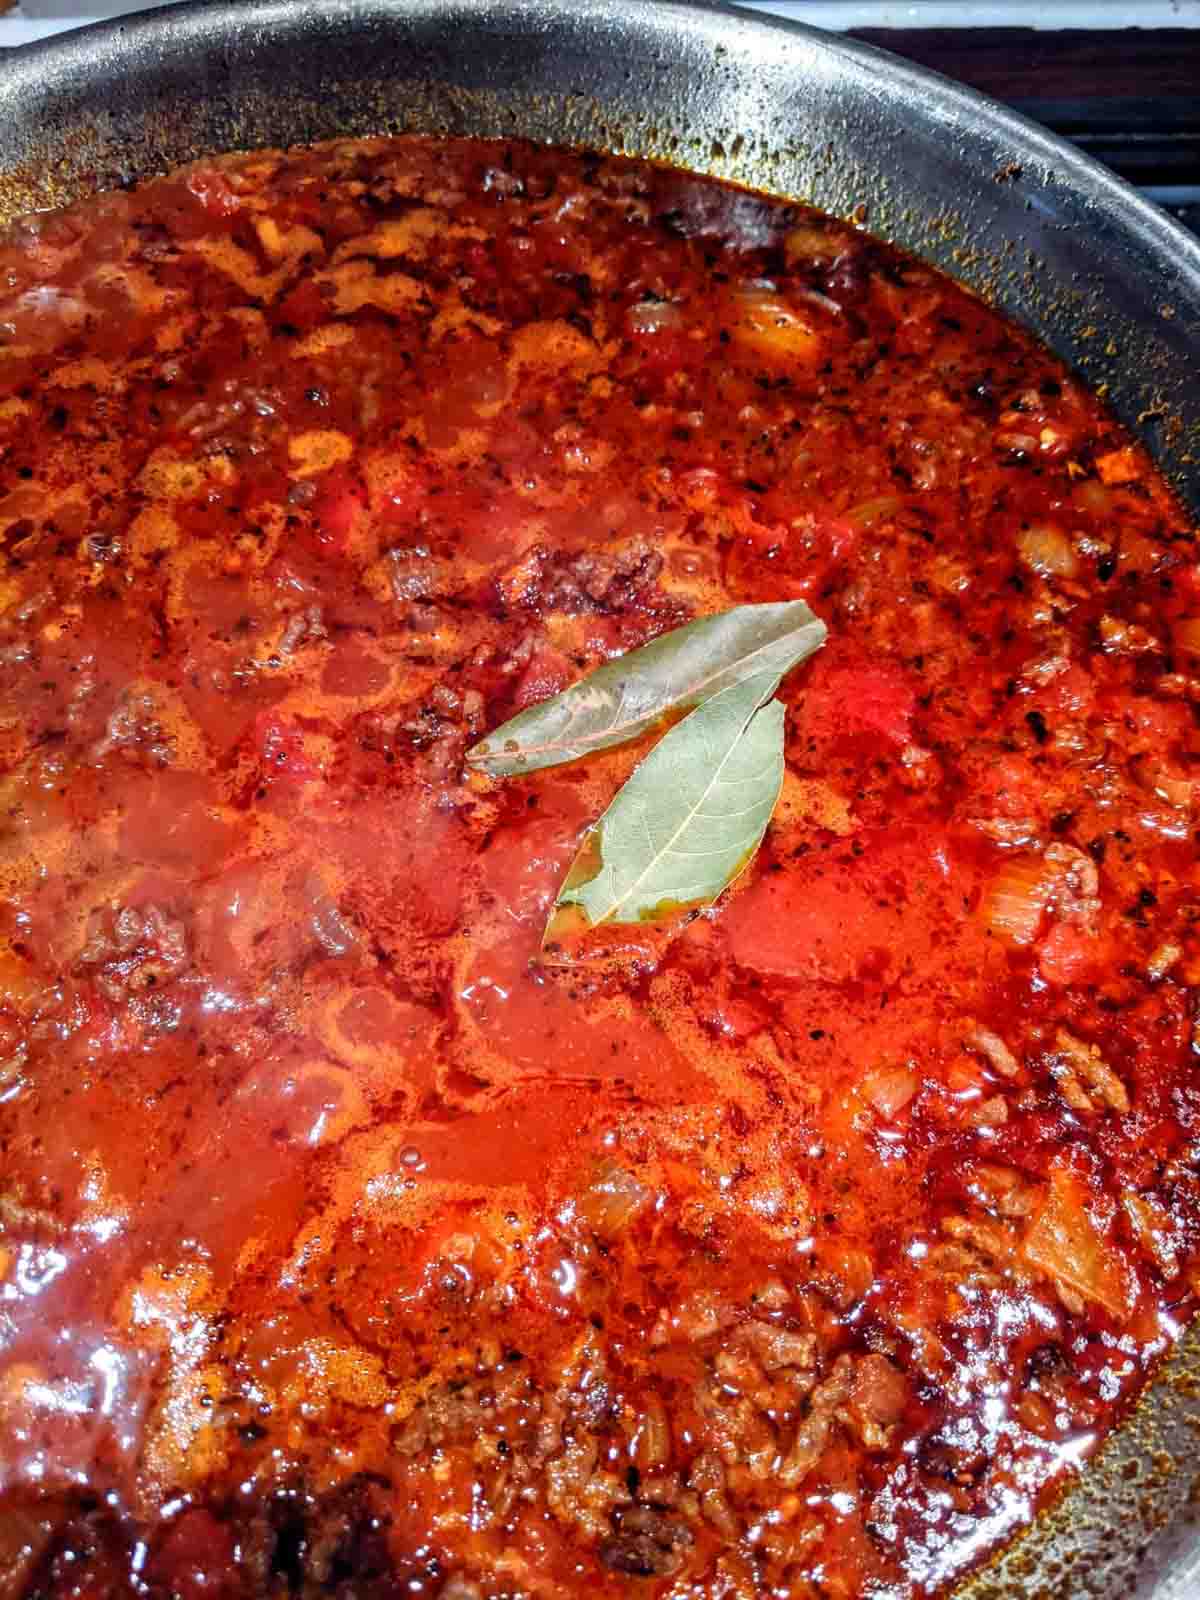 Cooking the meat sauce for the Ethiopian lasagna in a stainless steel skillet.